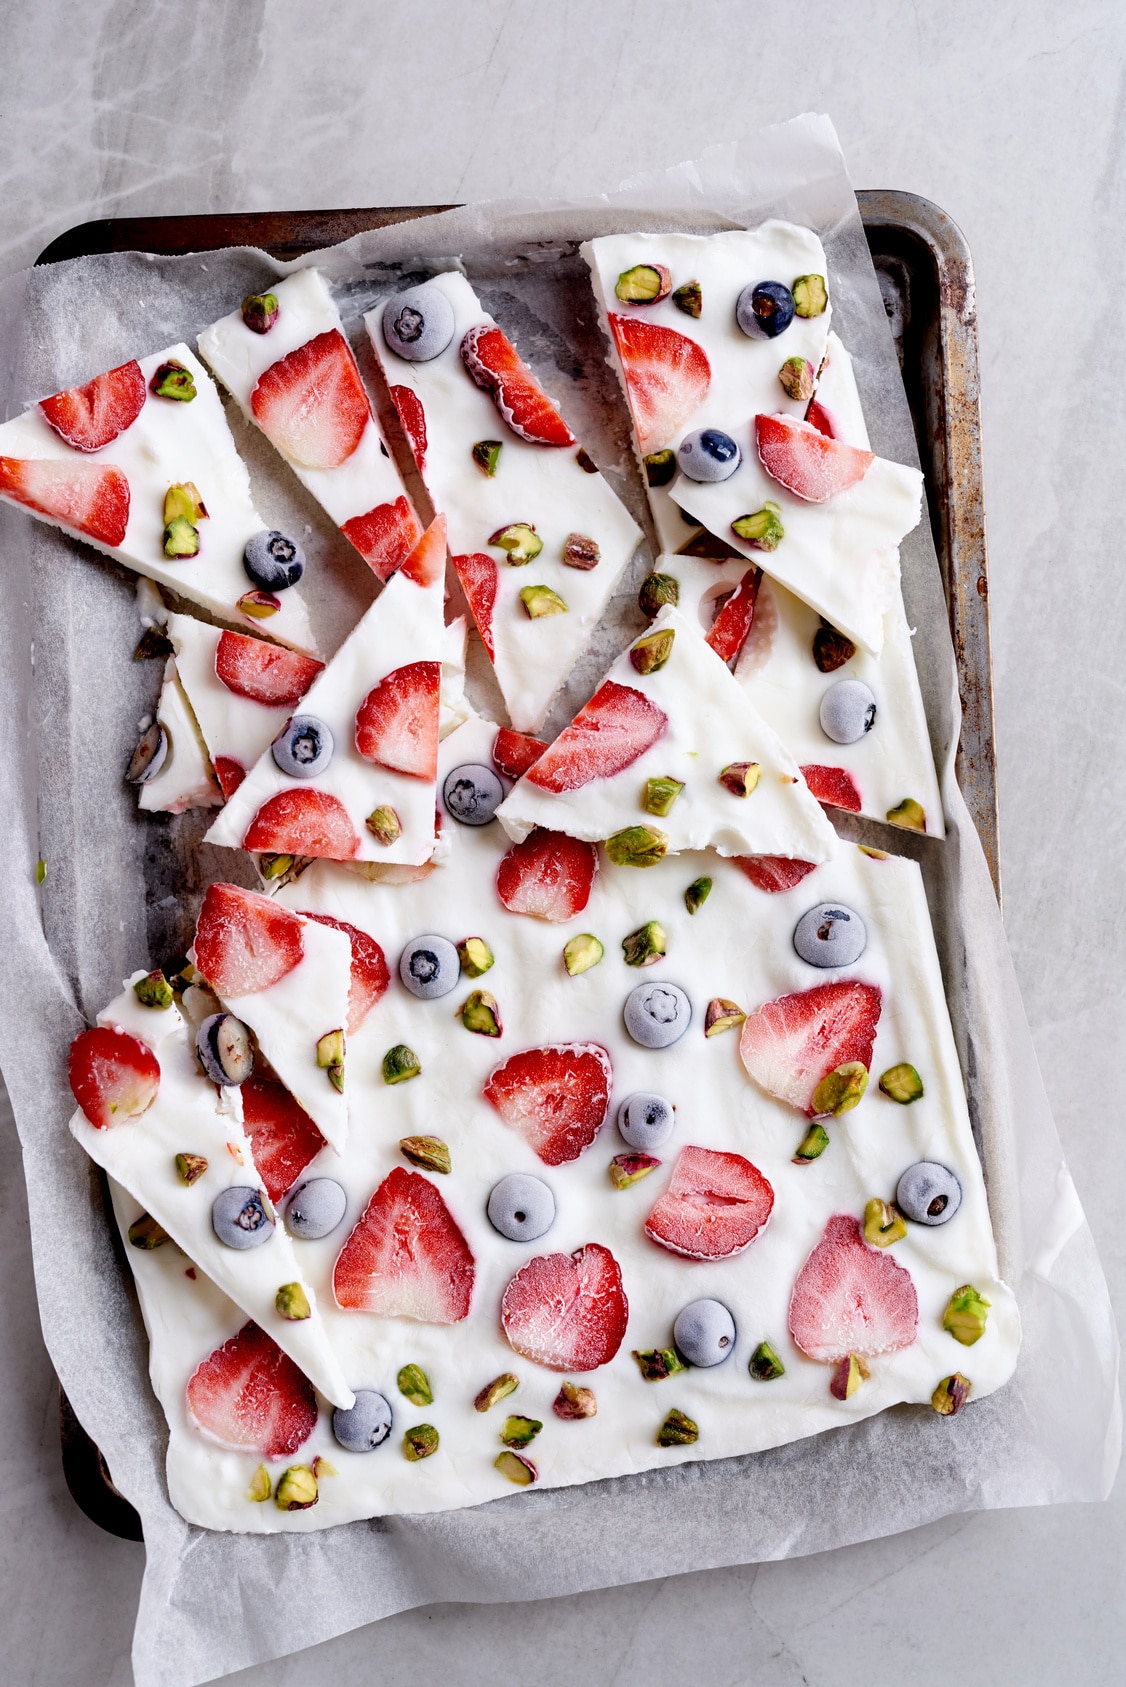 frozen yogurt bark with strawberries, blueberries, pistachios on a baking tray lined with baking paper